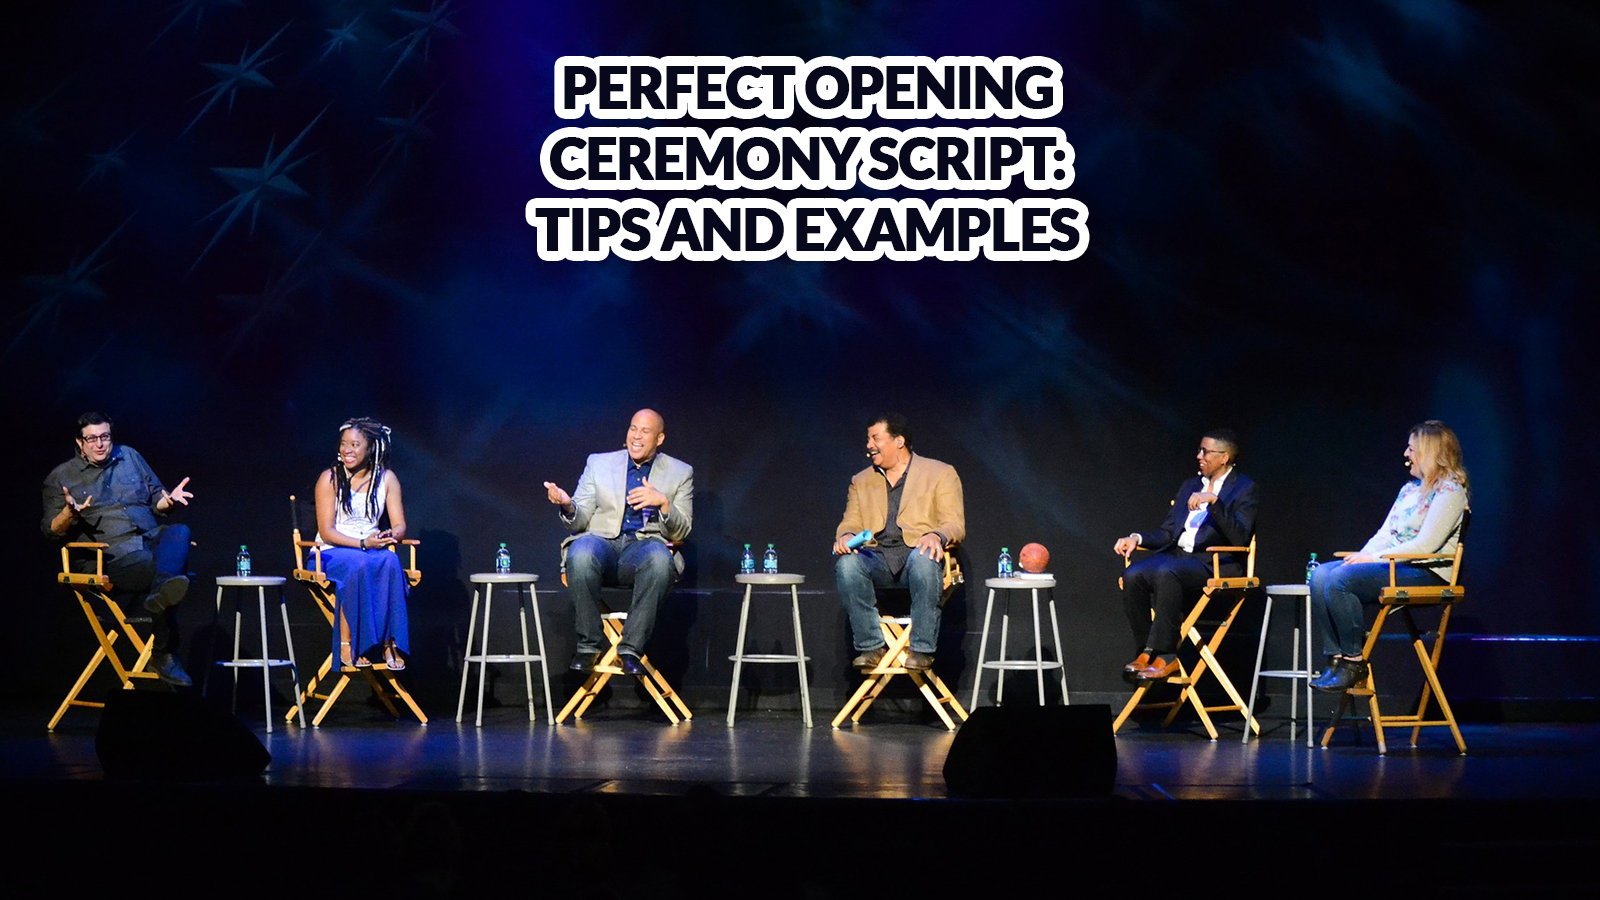 Perfect Opening Ceremony Script: Tips and Examples